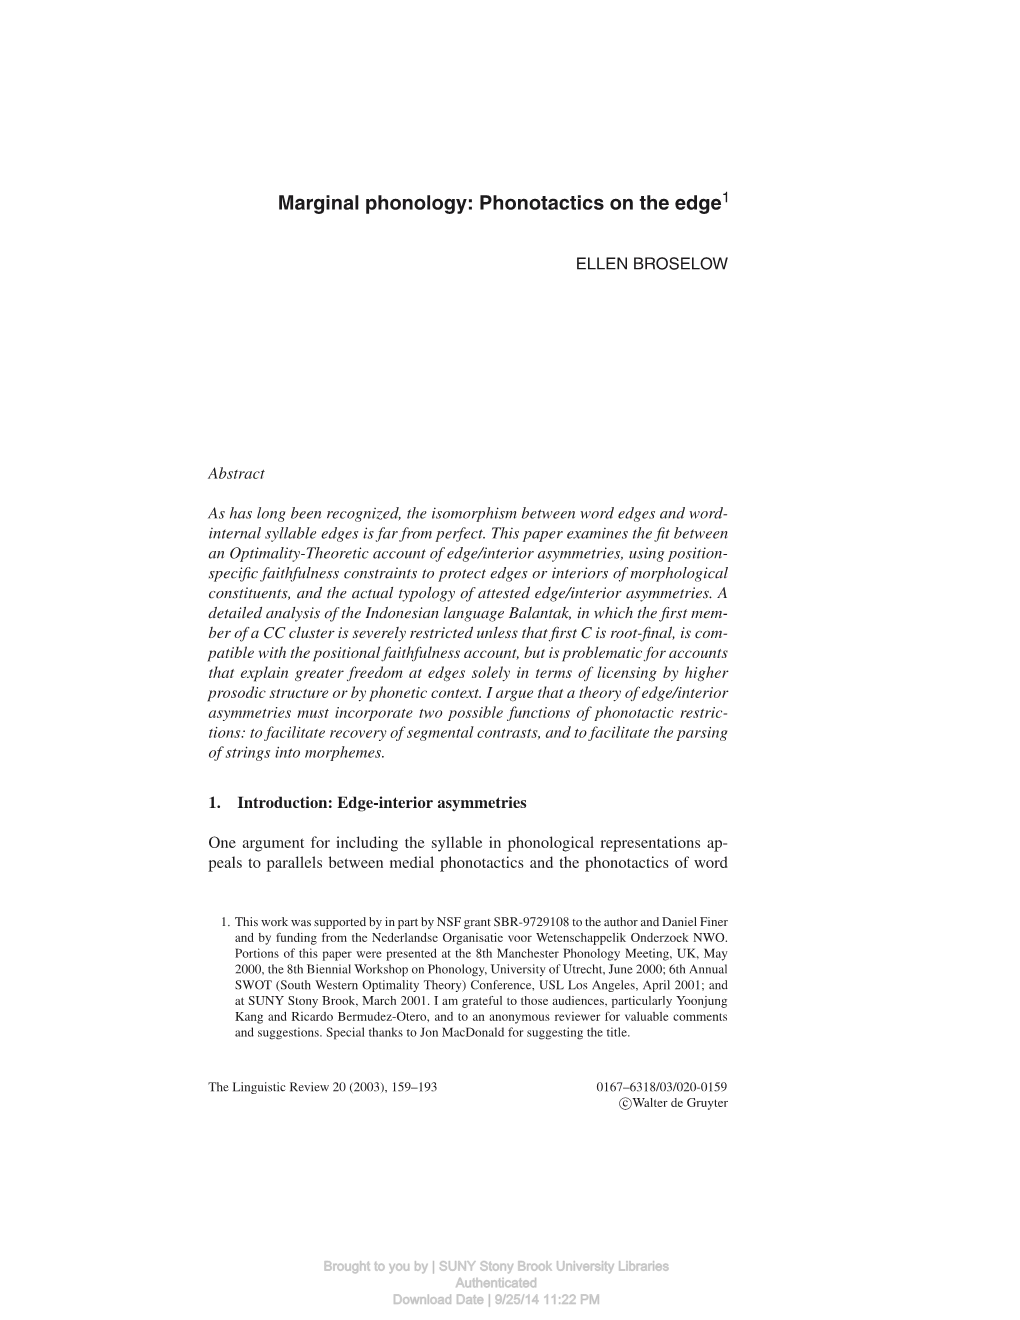 Marginal Phonology: Phonotactics on the Edge1